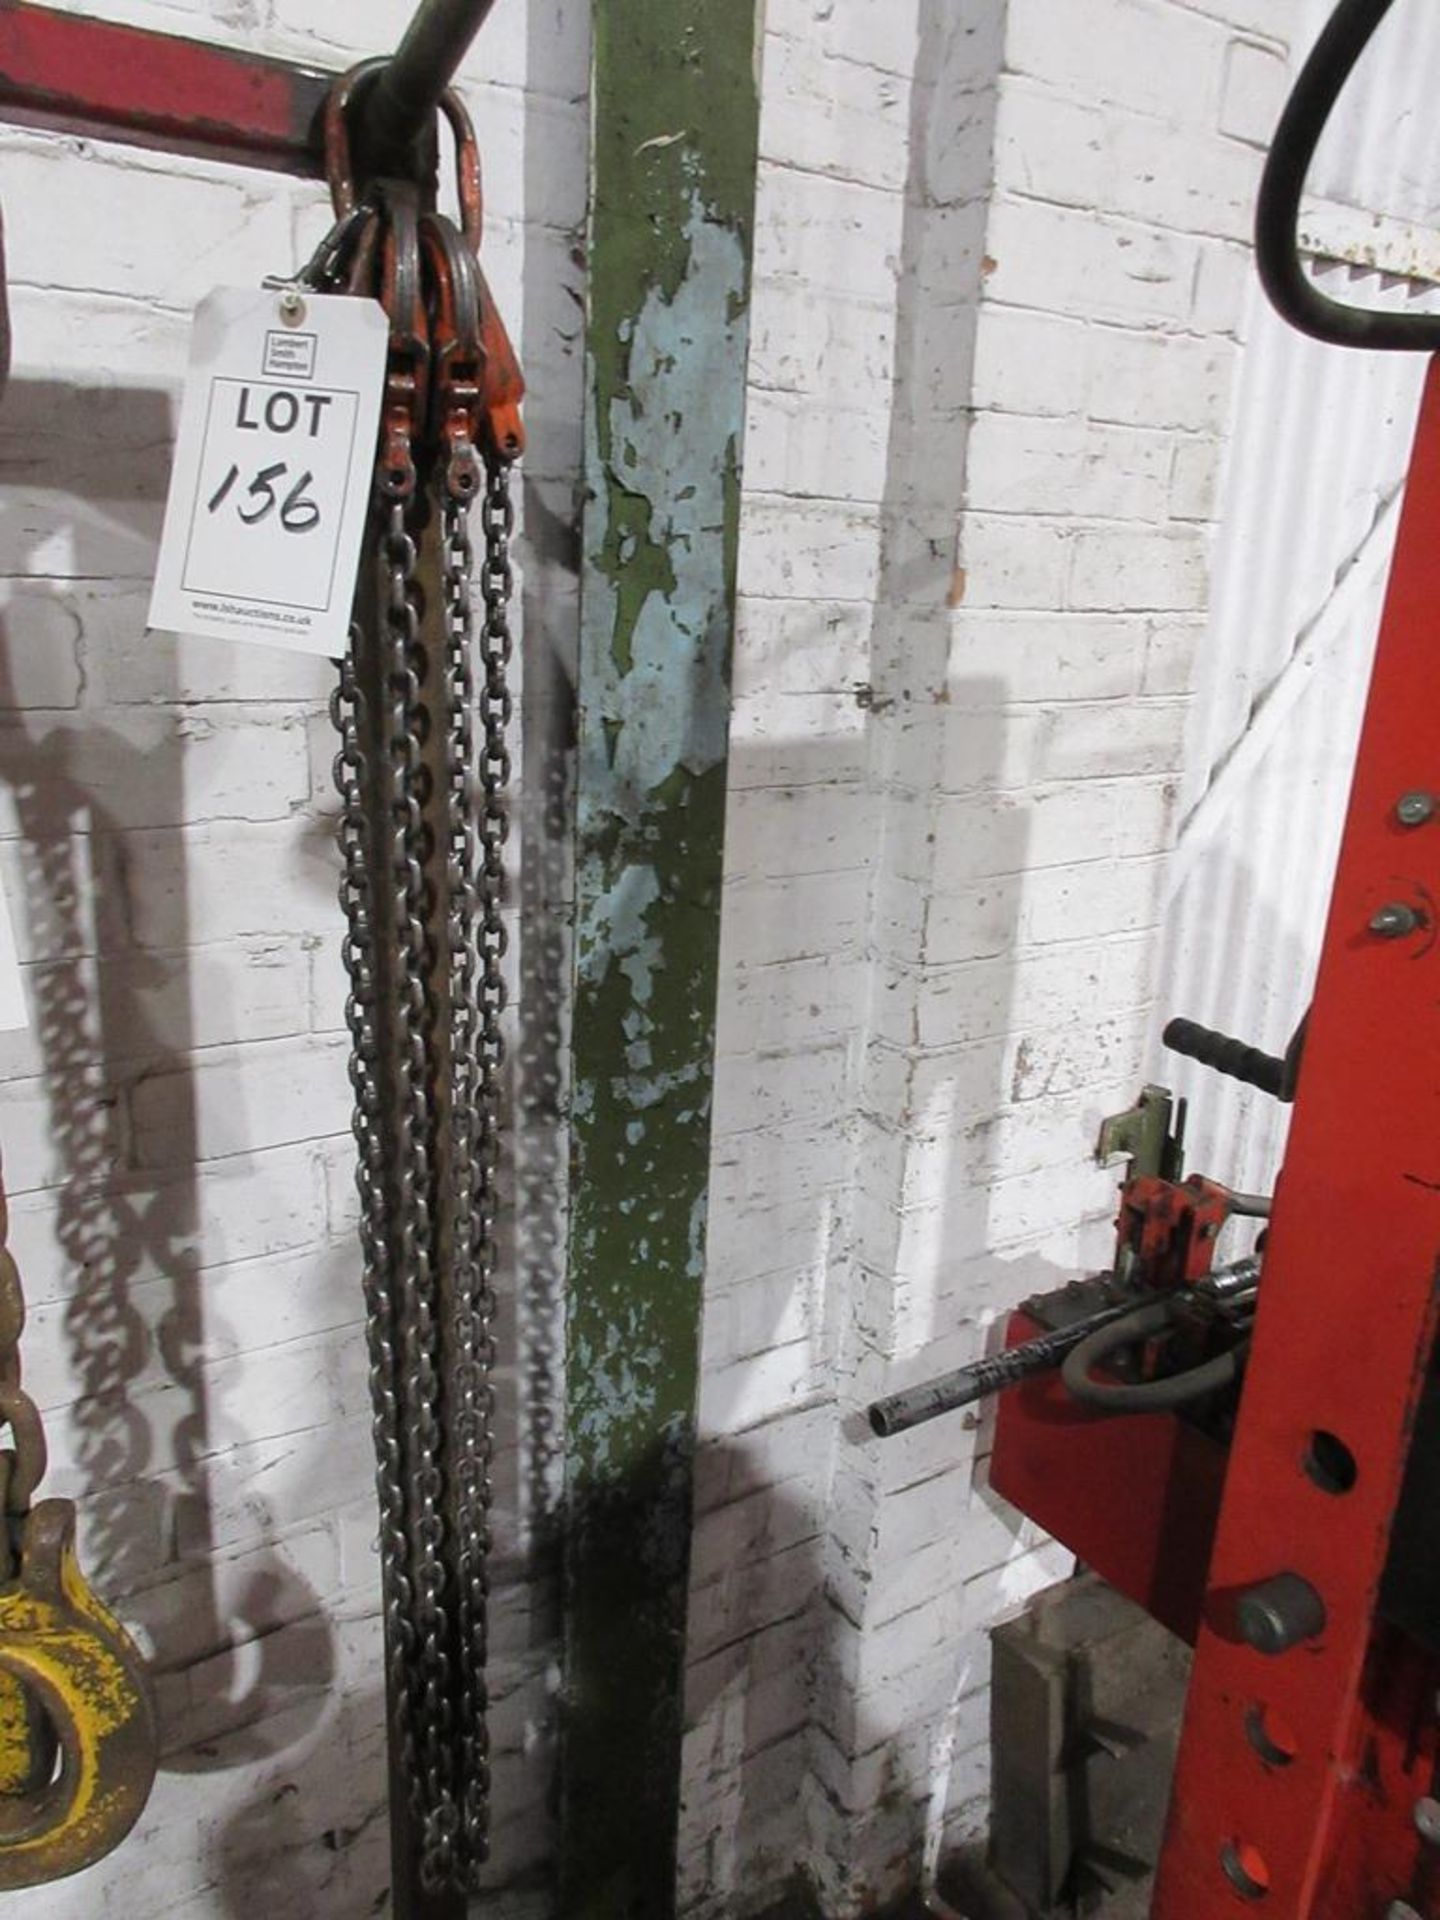 2 Leg lifting chain, with shorteners NB: This item has no record of Thorough Examination. The